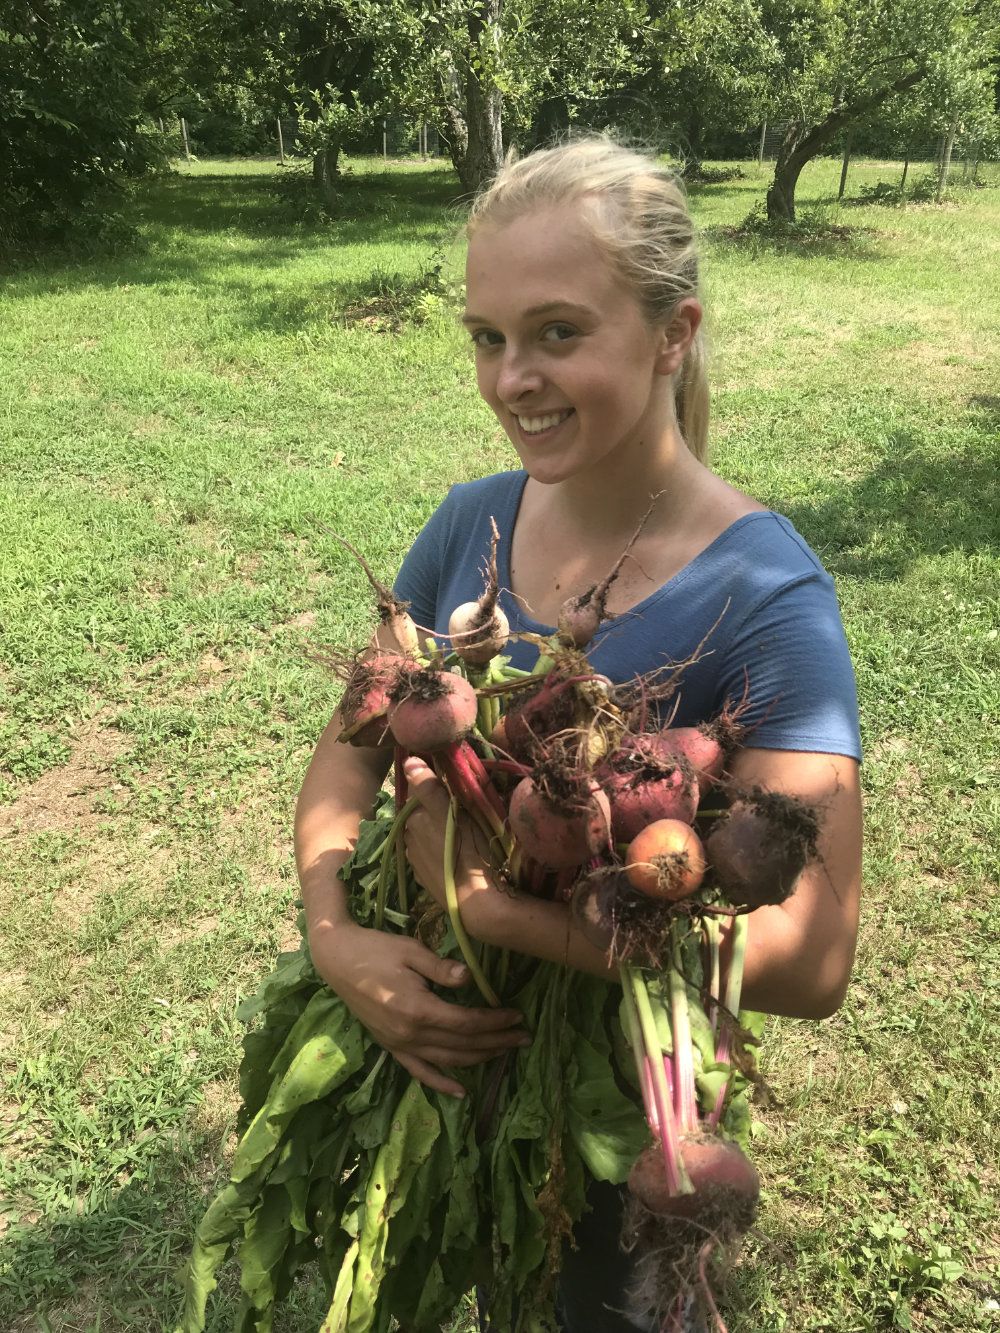 Haley, our agriculture intern in 2018, holds an armful of freshly harvested beets.